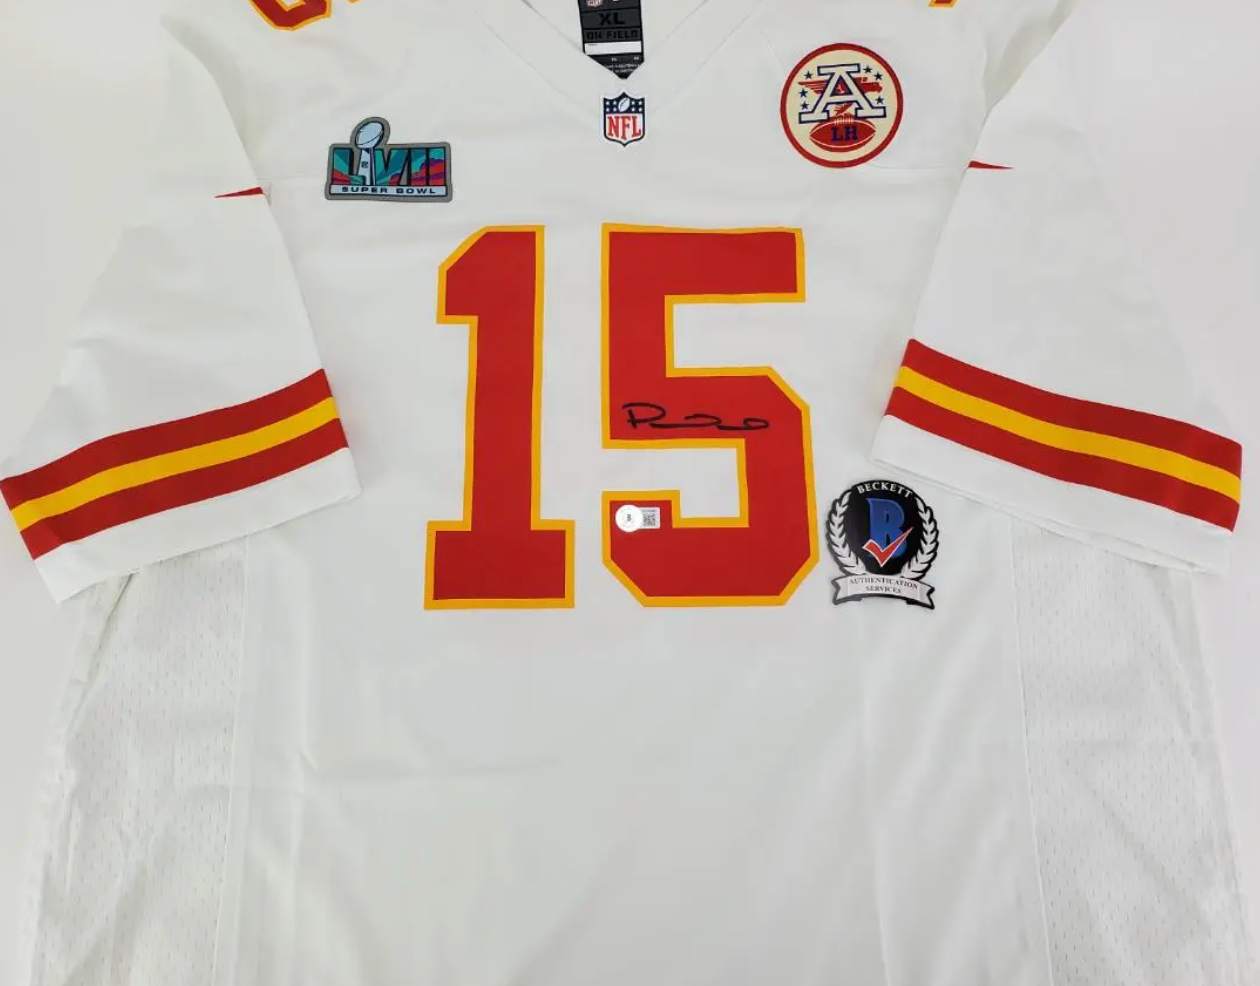 Patrick Mahomes Signed Kansas City Chiefs Nike NFL Game Replica Jersey W/ SB LVII Patch (Beckett Witness Certified)